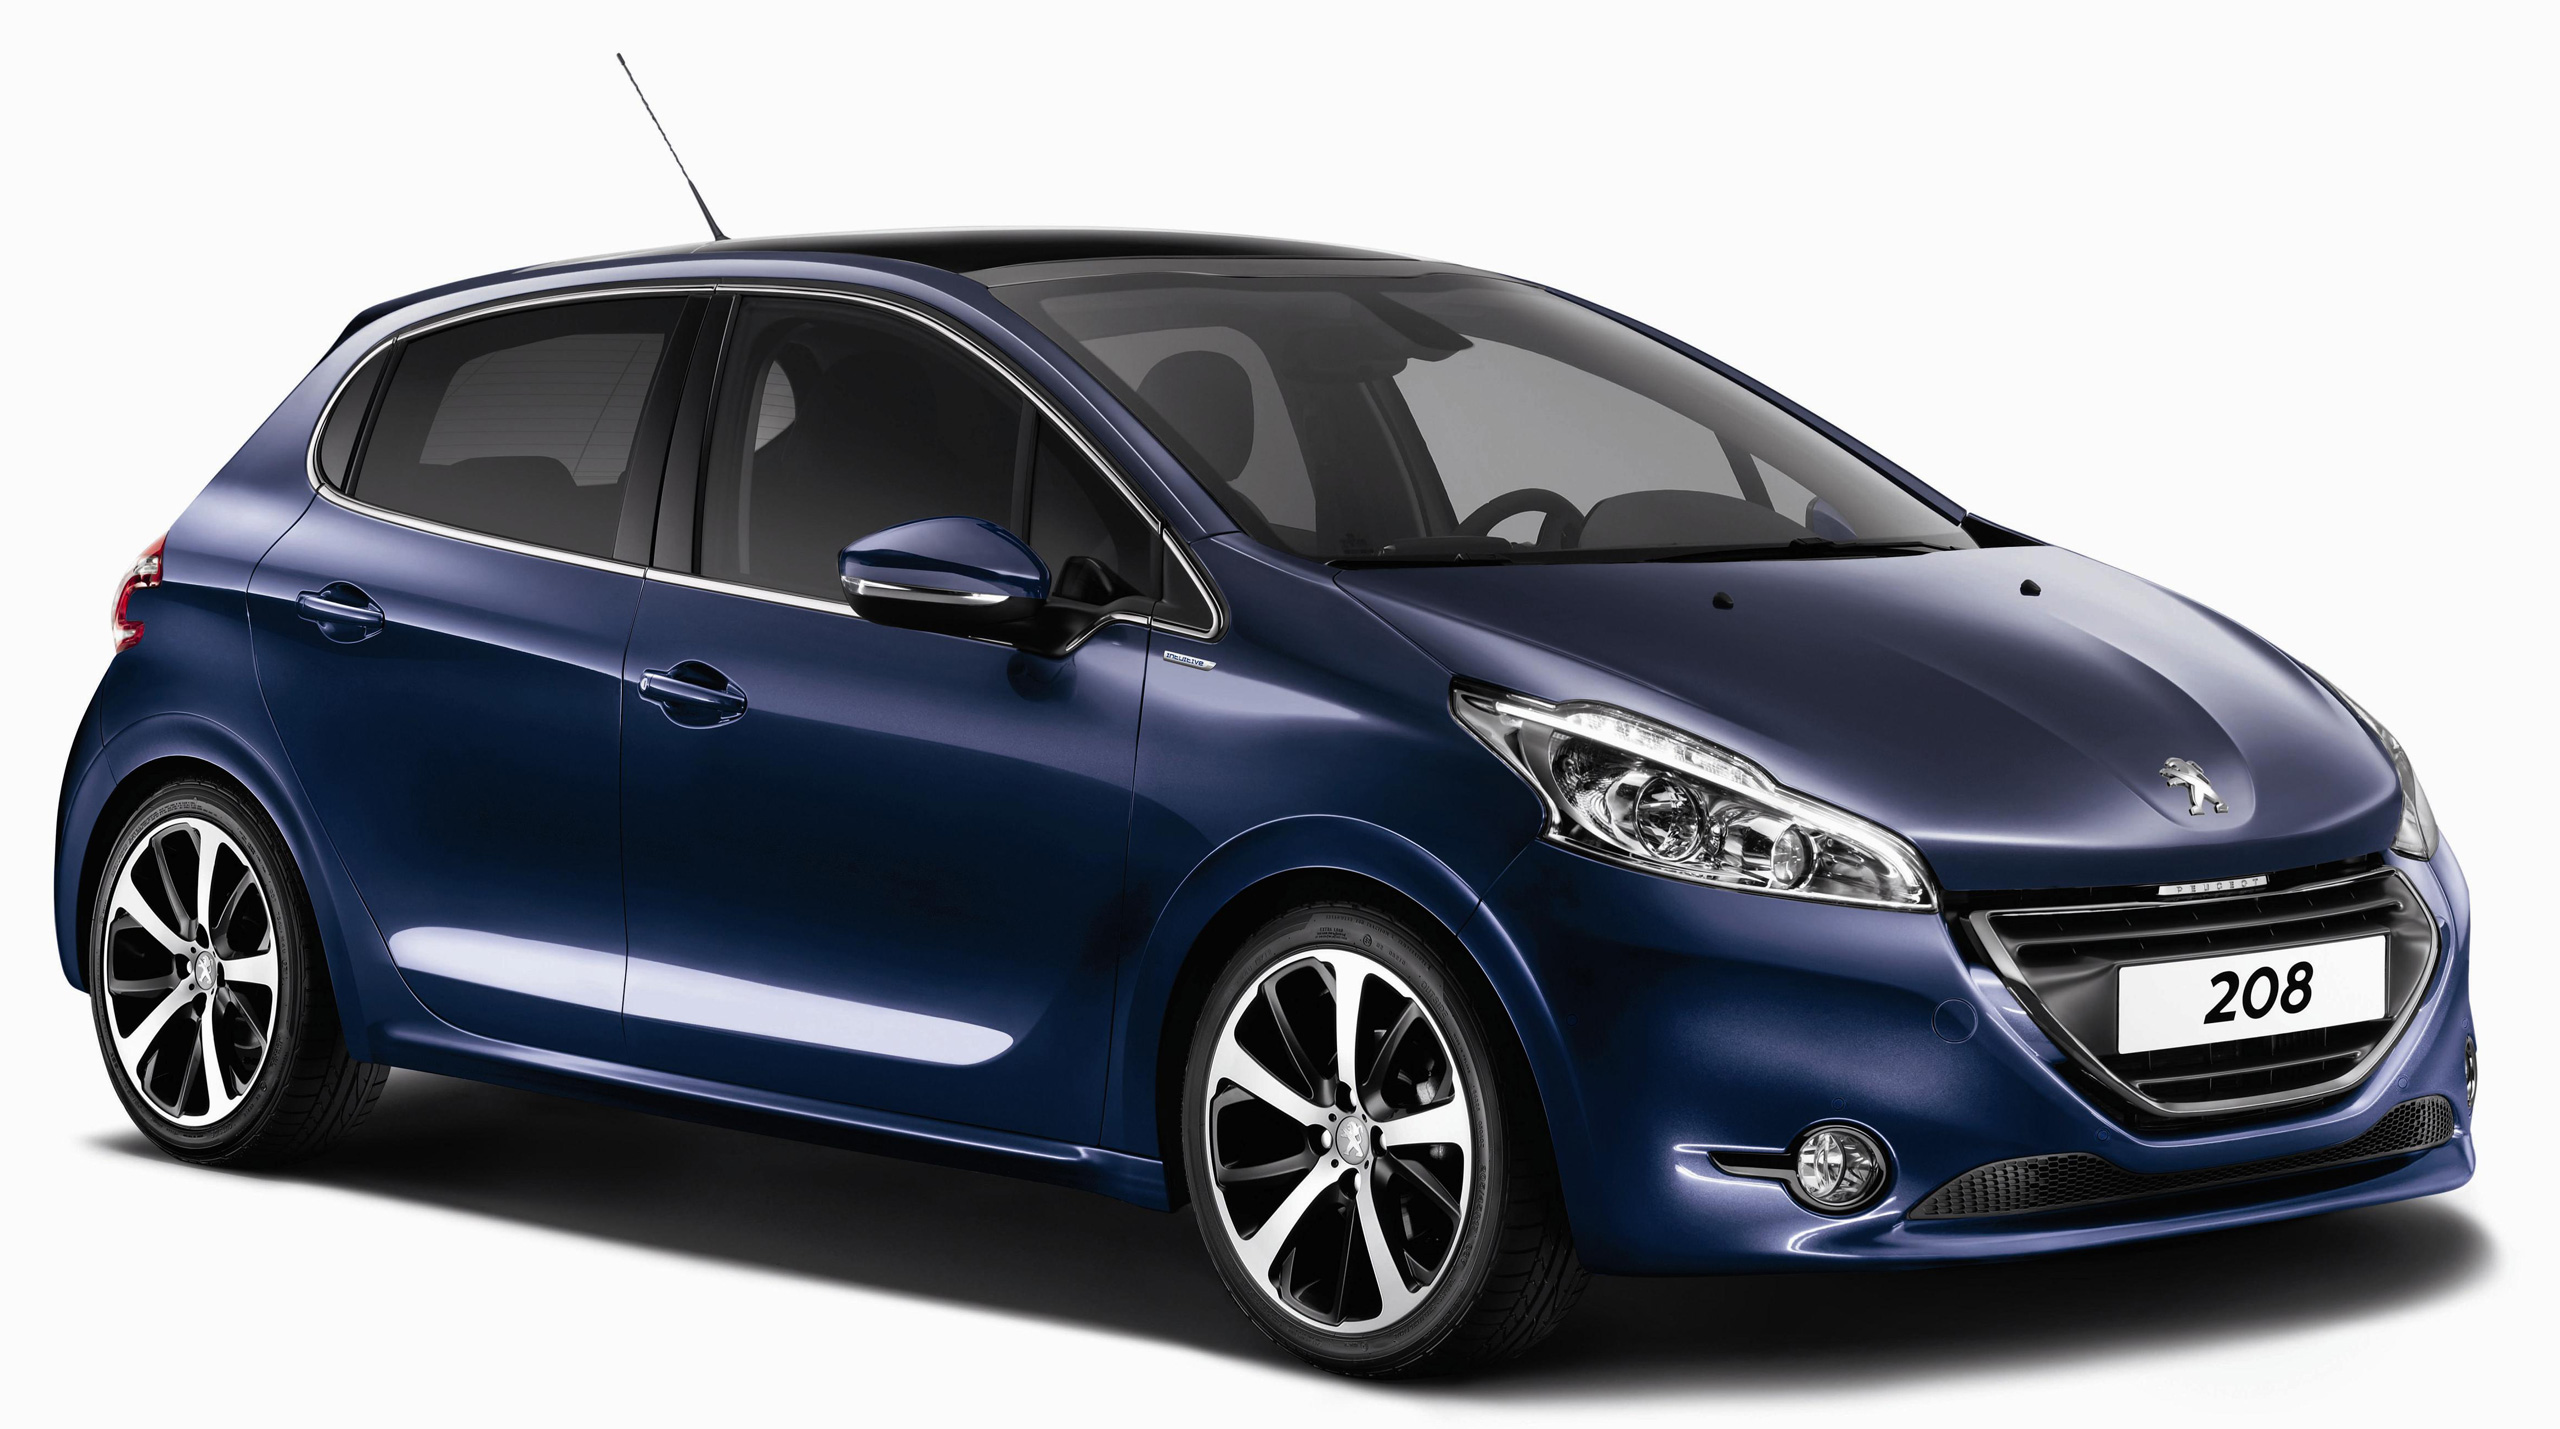 New Peugeot 208 all set for mid April Malaysian launch Image 164655